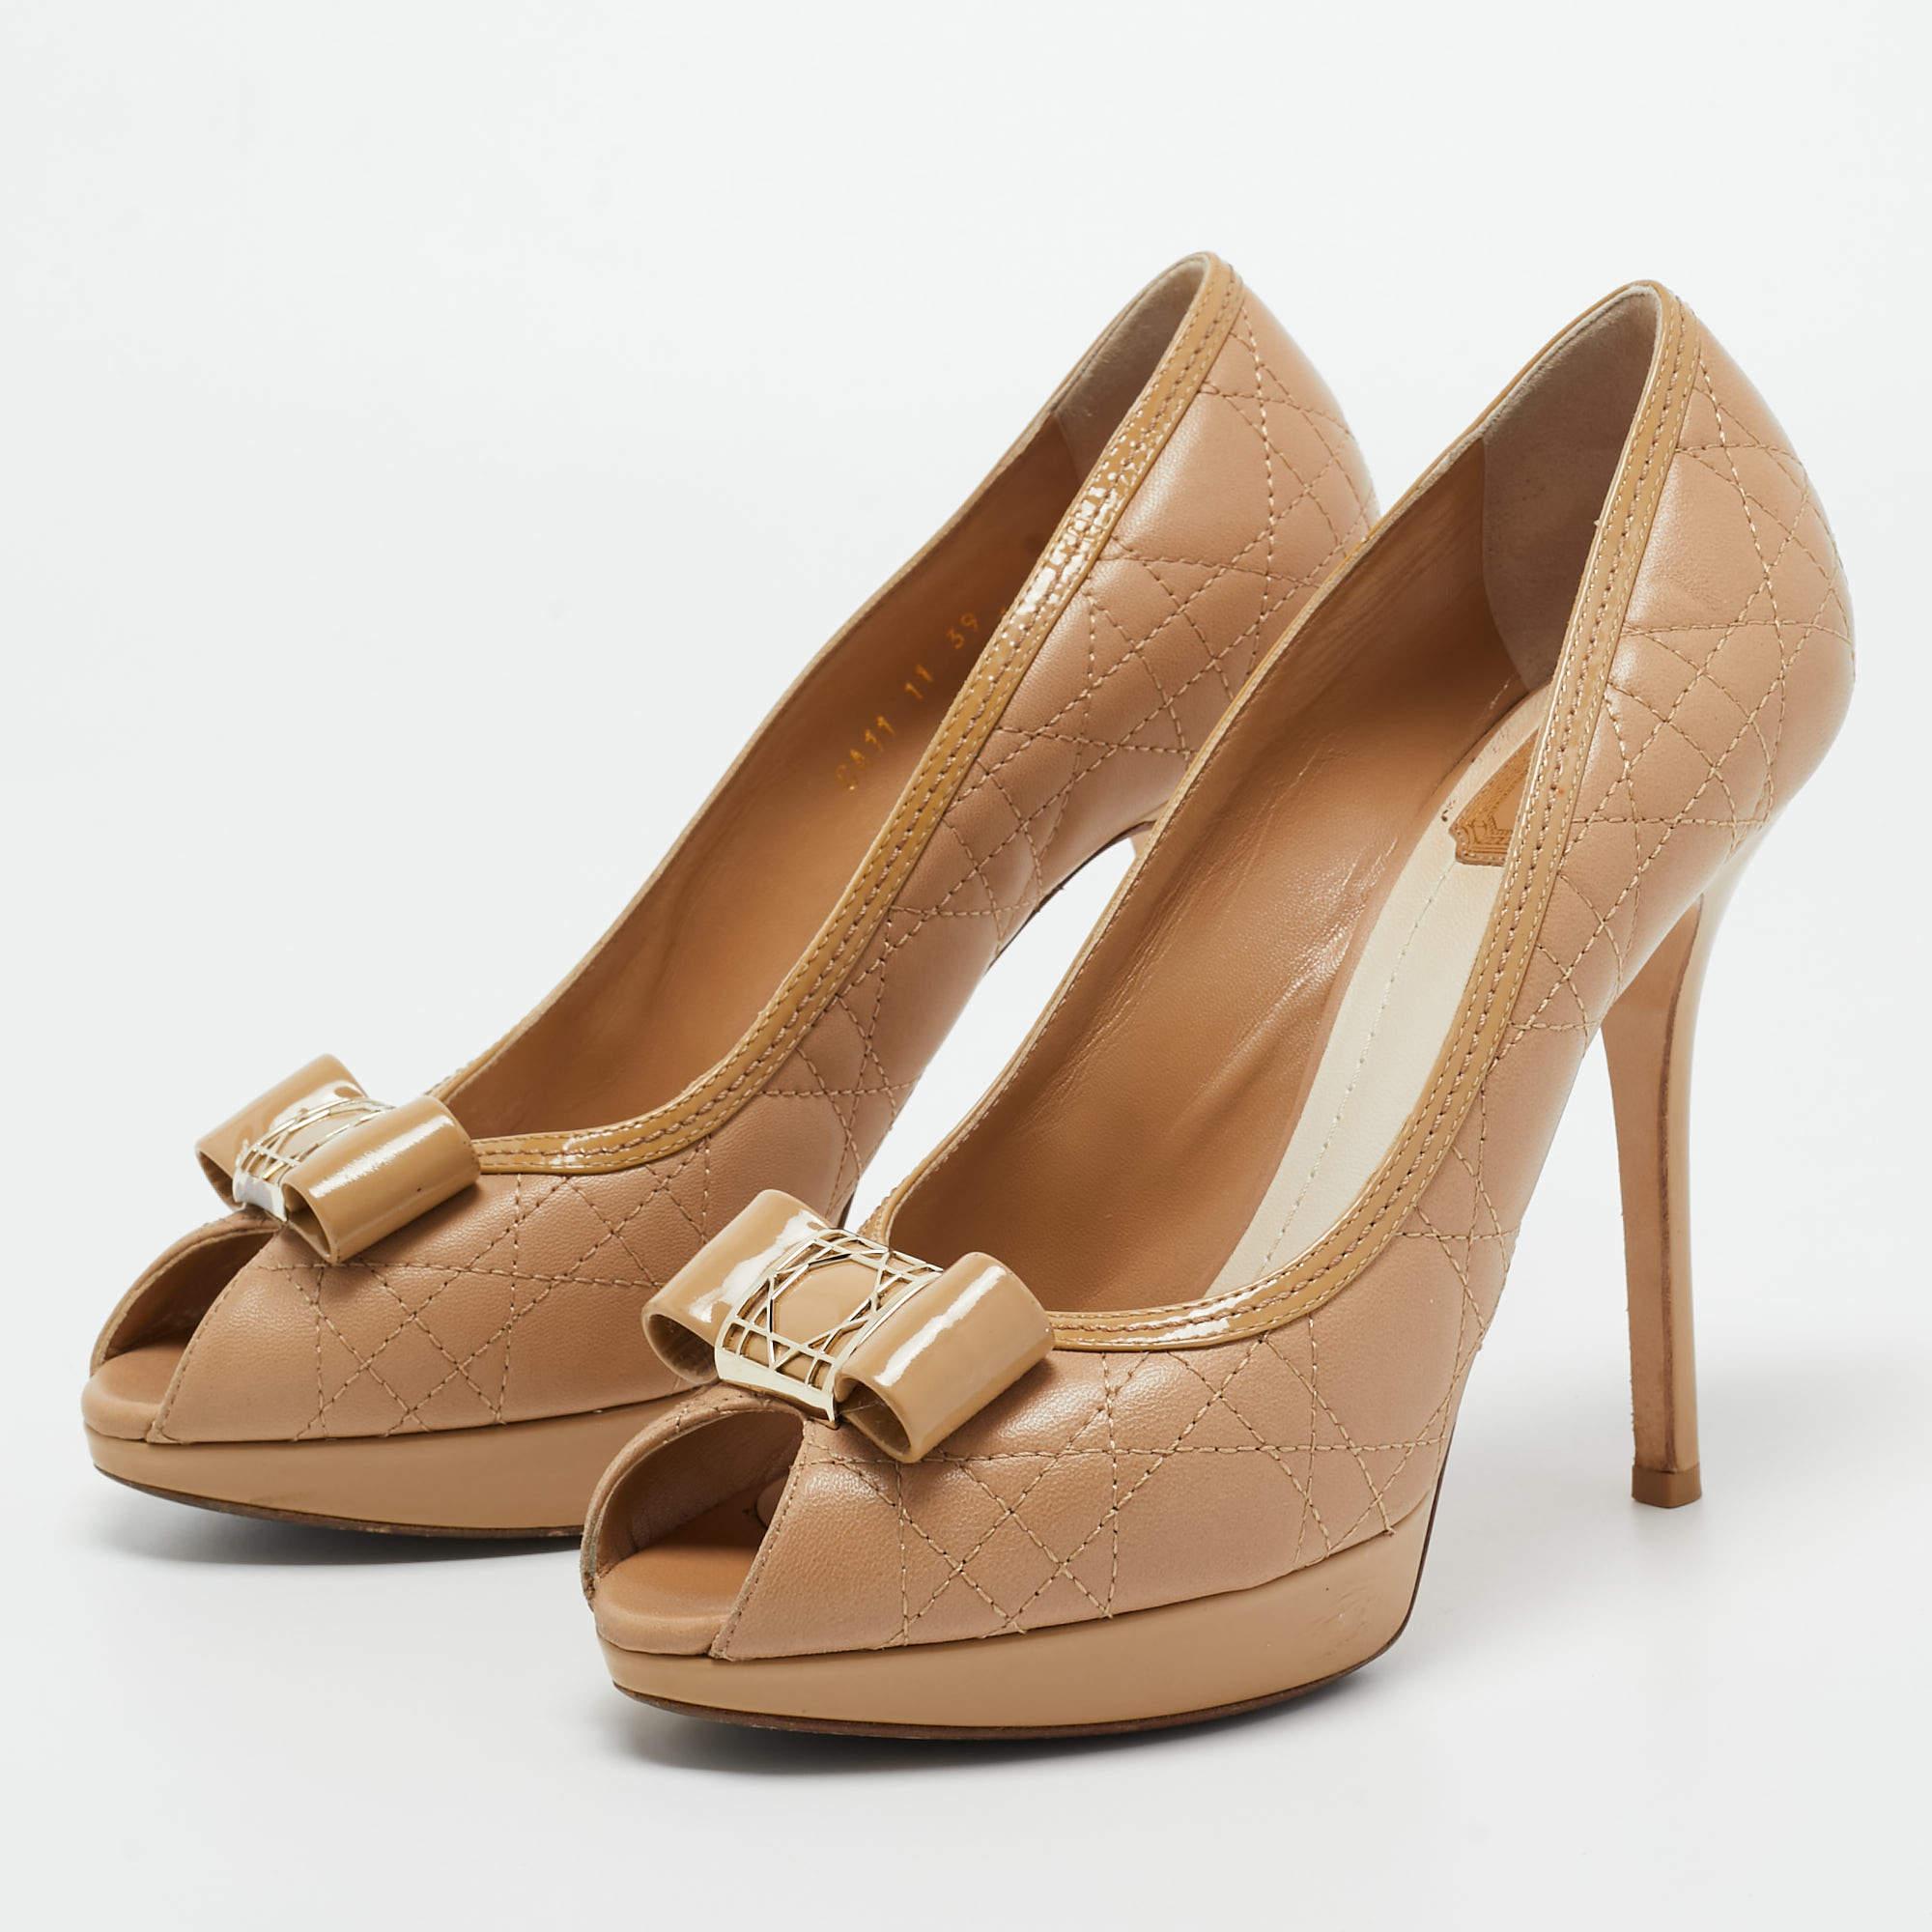 Dior Beige Patent Leather and Leather Peep Toe Pumps Size 39 1